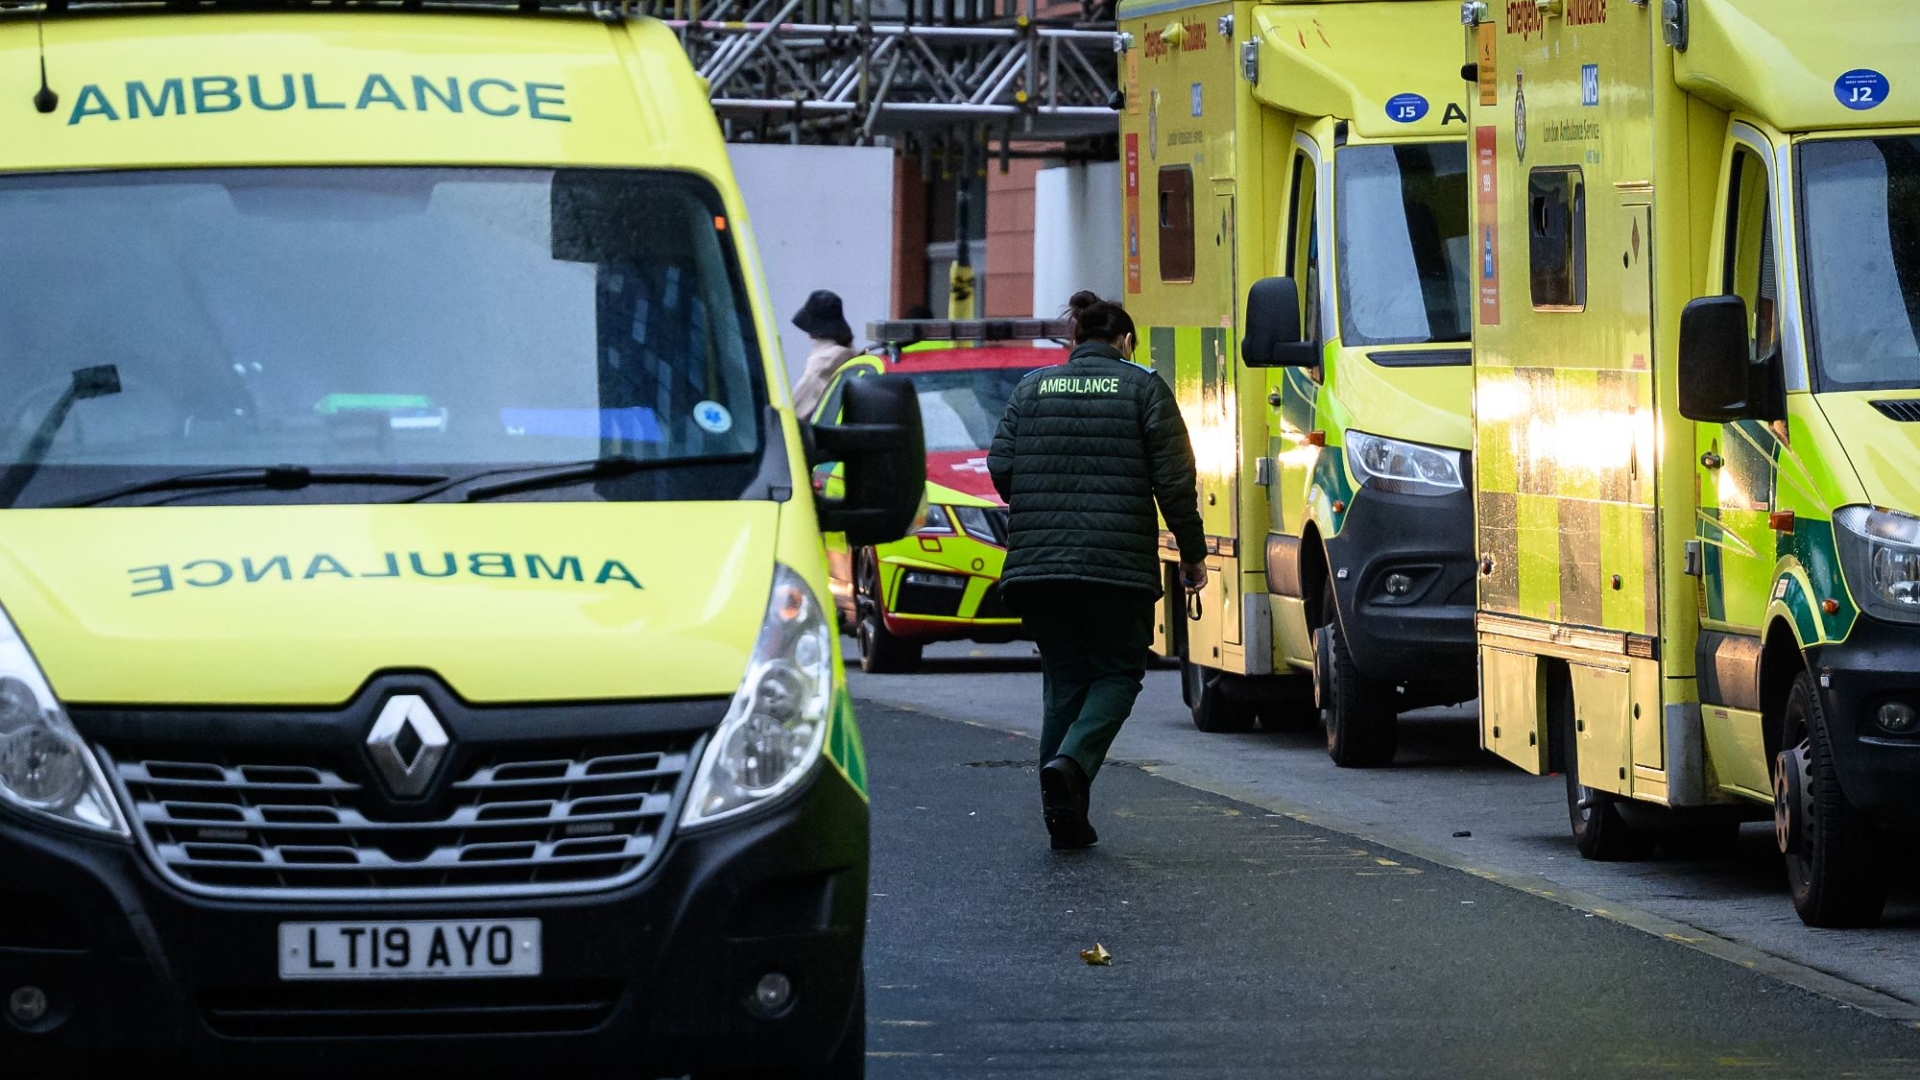 In an emergency plan for saving the NHS from strikes in winter, Army could be called upon to operate ambulances and manage hospitals.